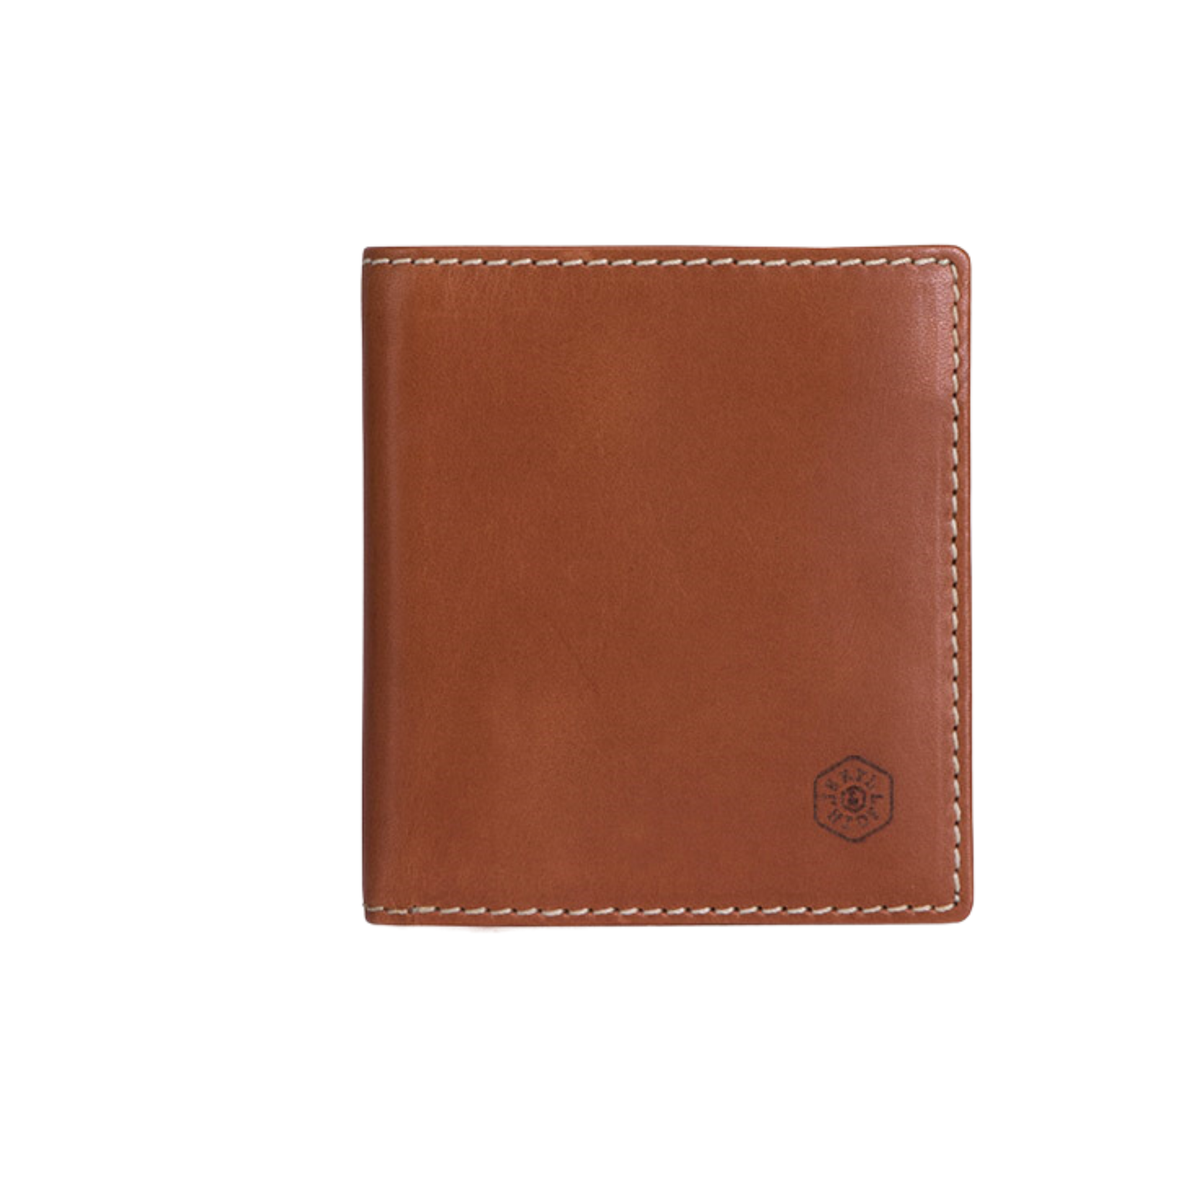 JEKYLL & HIDE SLIM BILLFOLD WALLET WITH COIN  - ROMA TAN